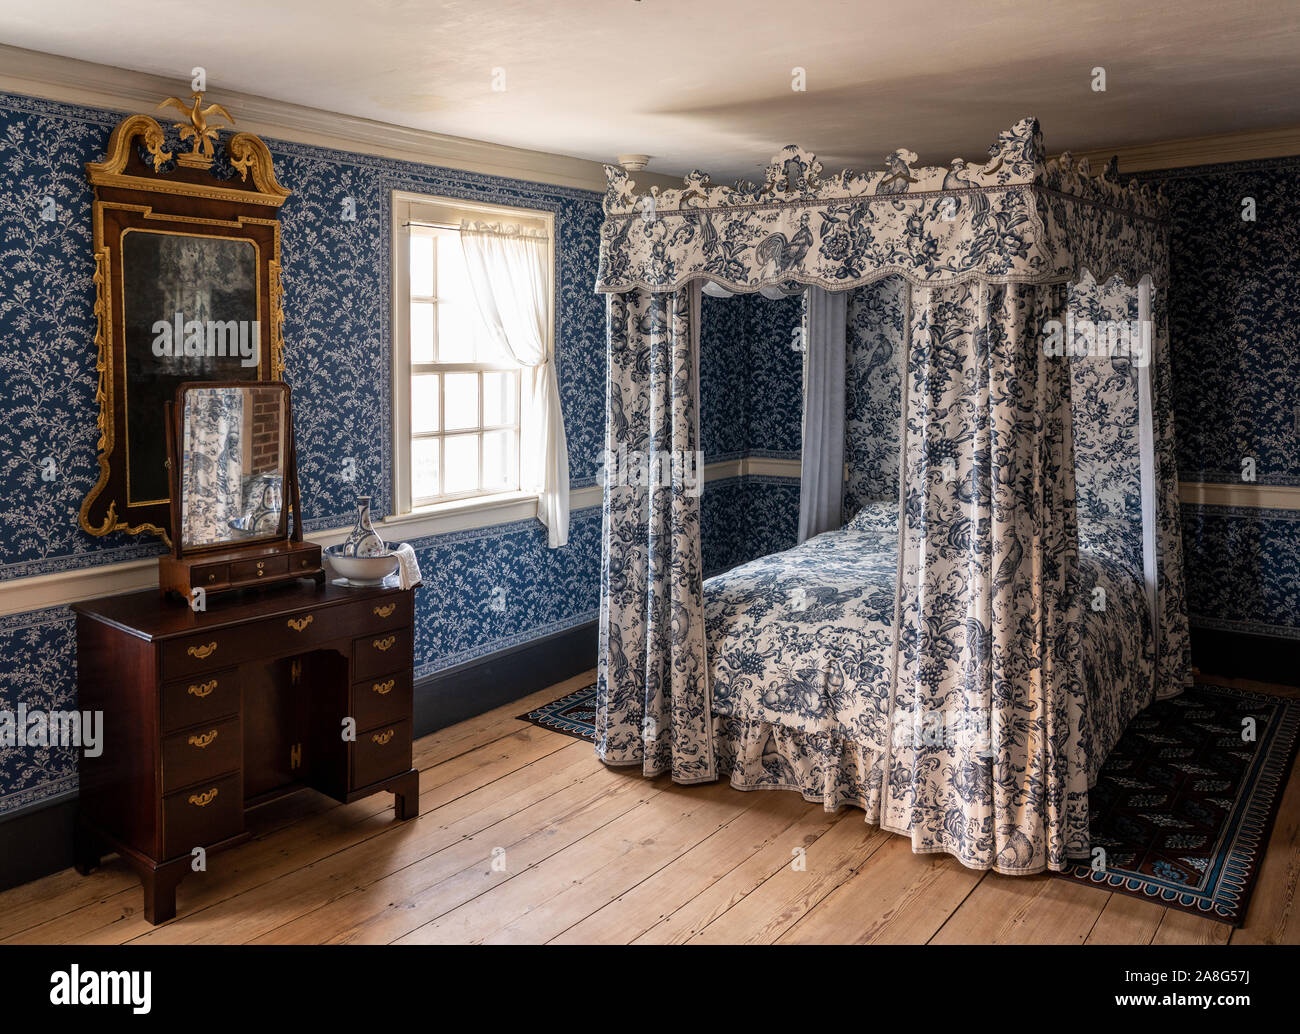 Mount Vernon, VA - 5 November 2019: Four poster bed and bedchamber in the interior of George Washington's home at Mt Vernon Stock Photo